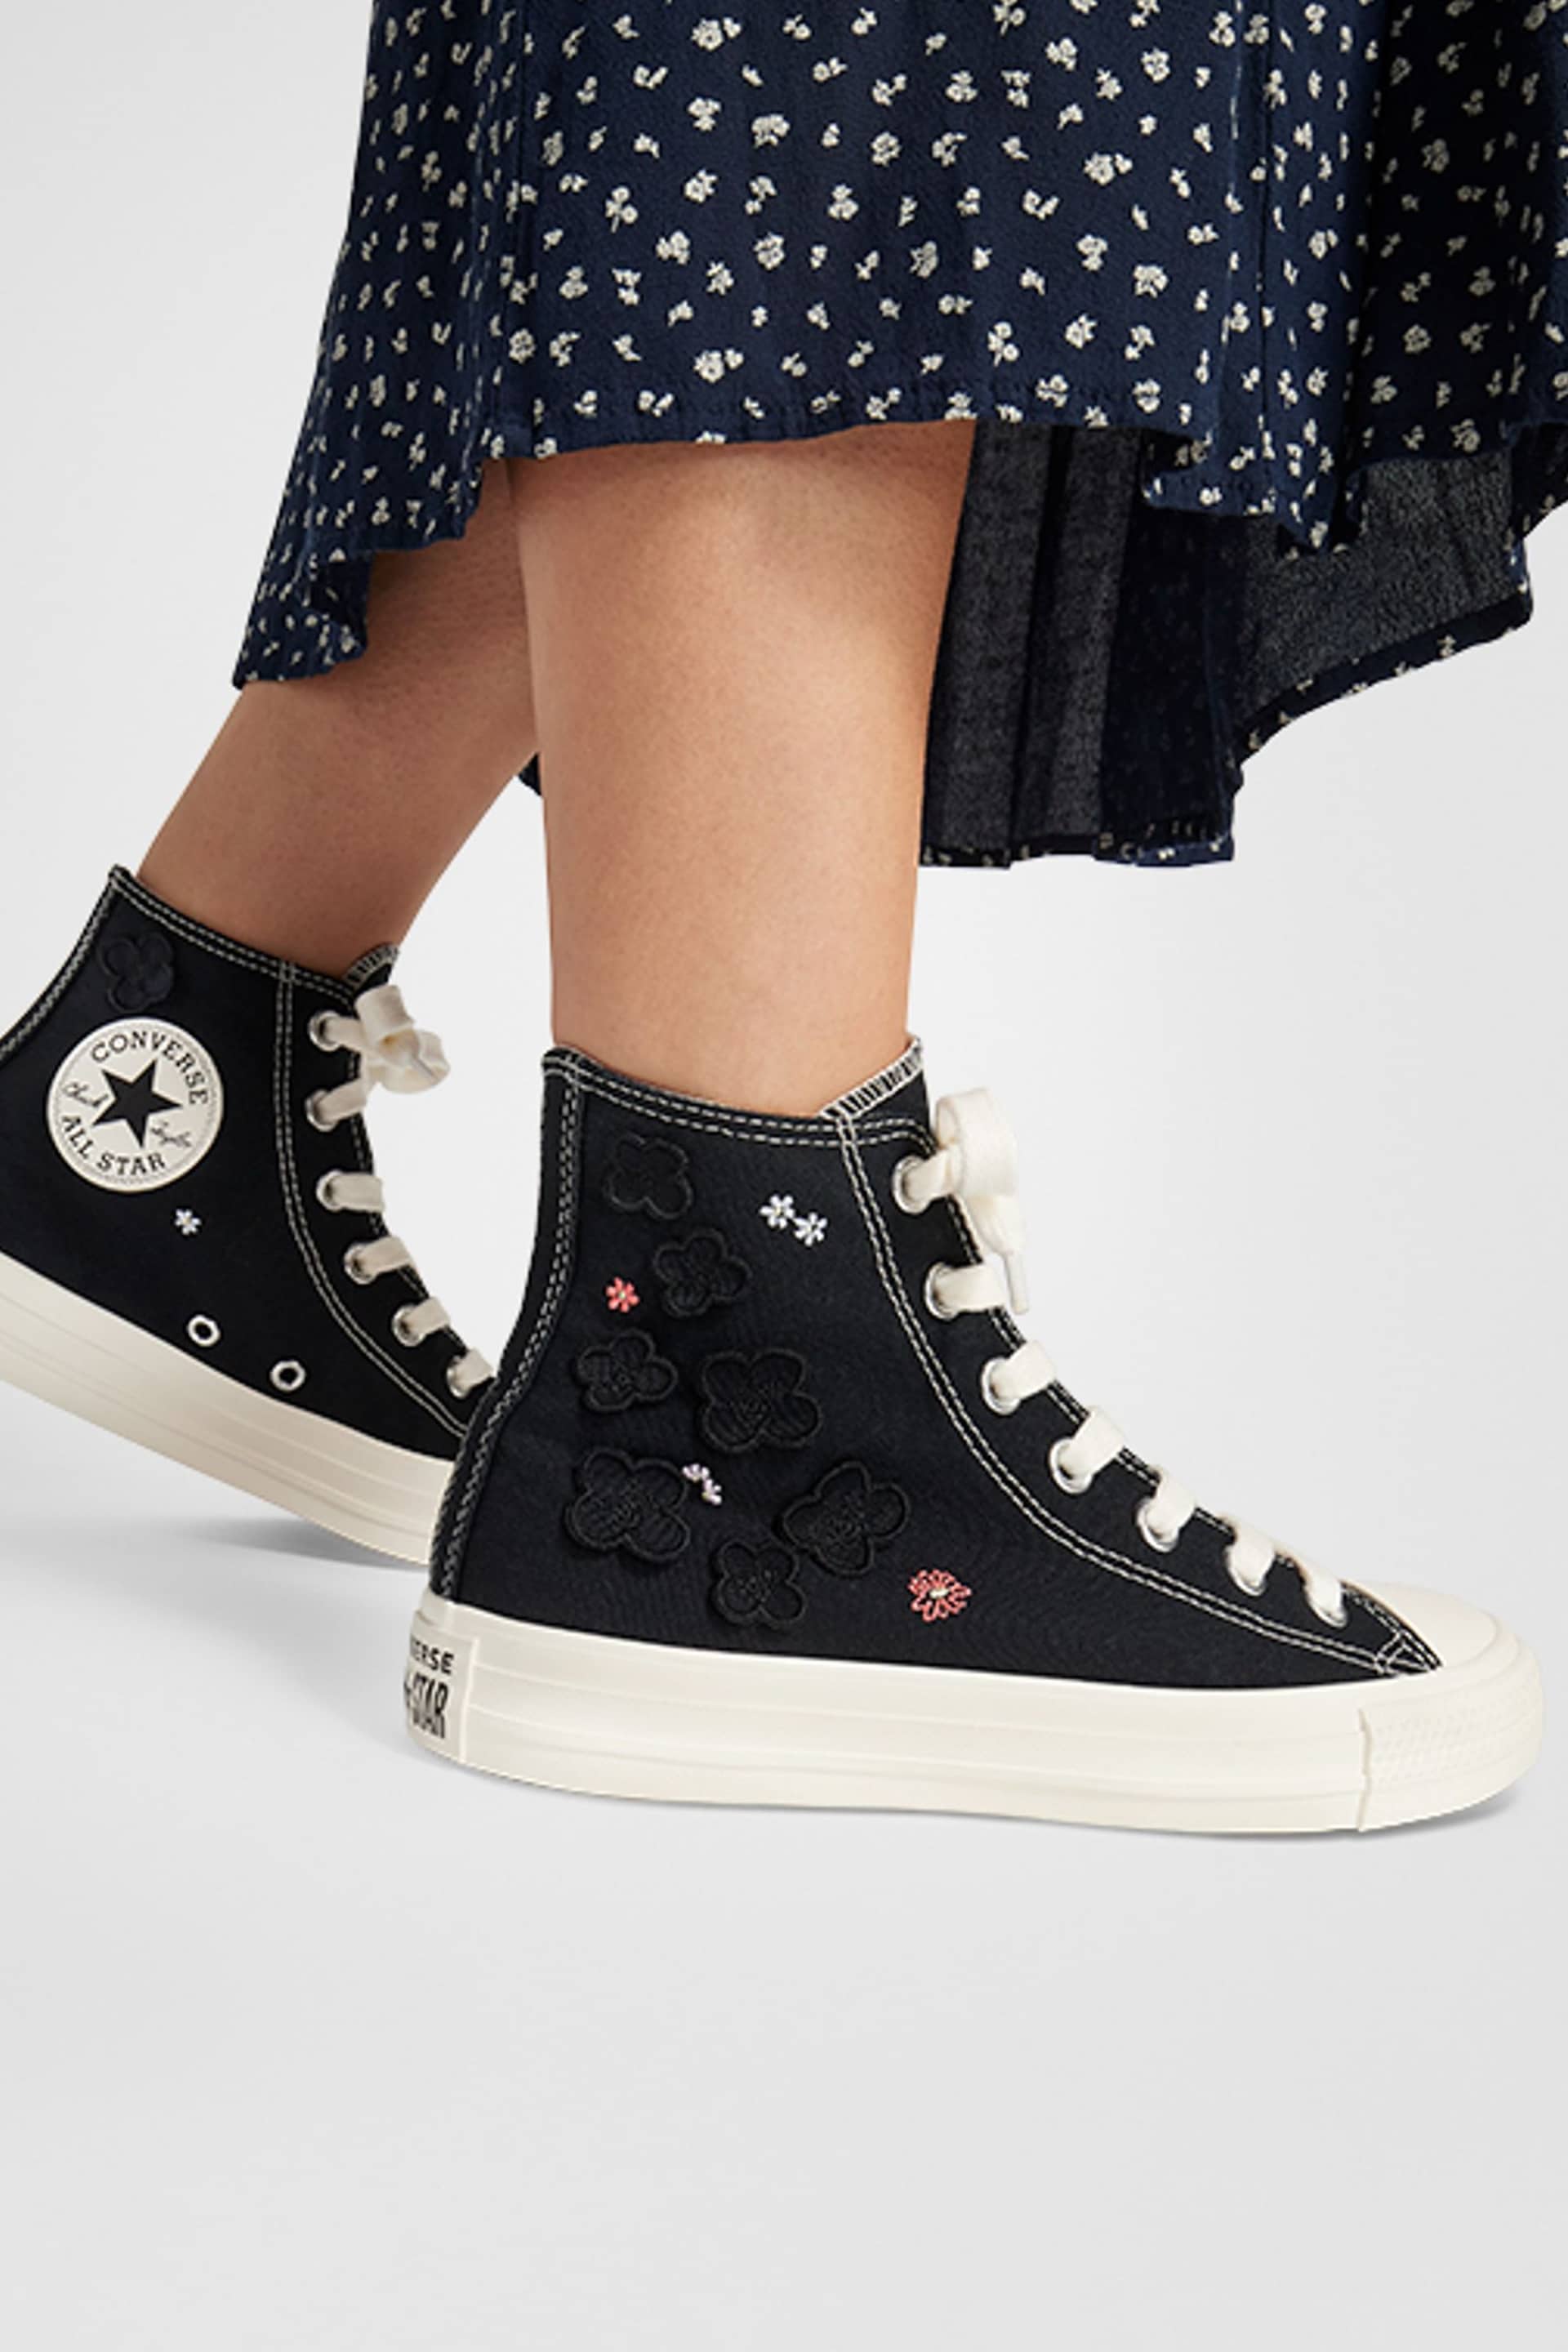 Converse Black Floral Embroidered High Top Trainers - Image 1 of 13